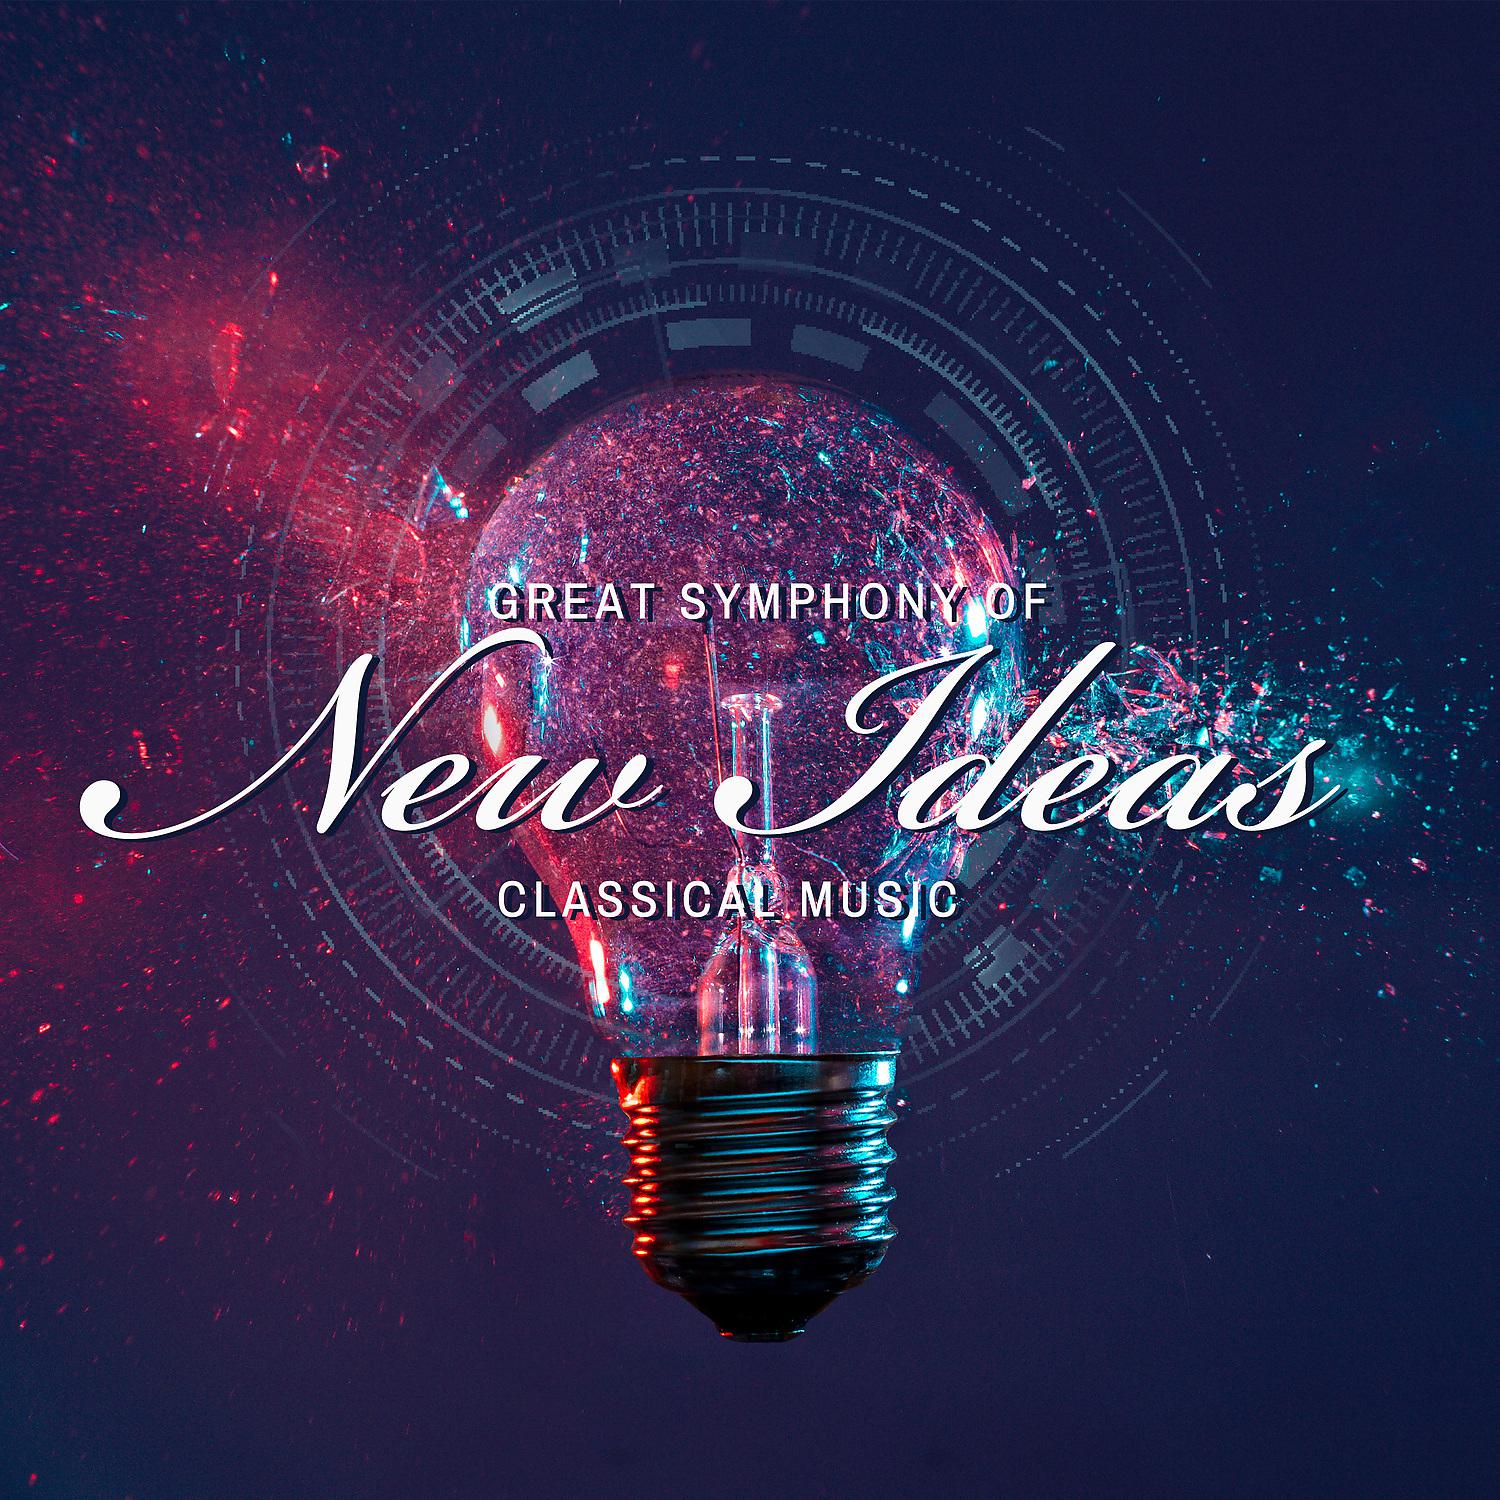 Постер альбома Great Symphony of New Ideas – Classical Music